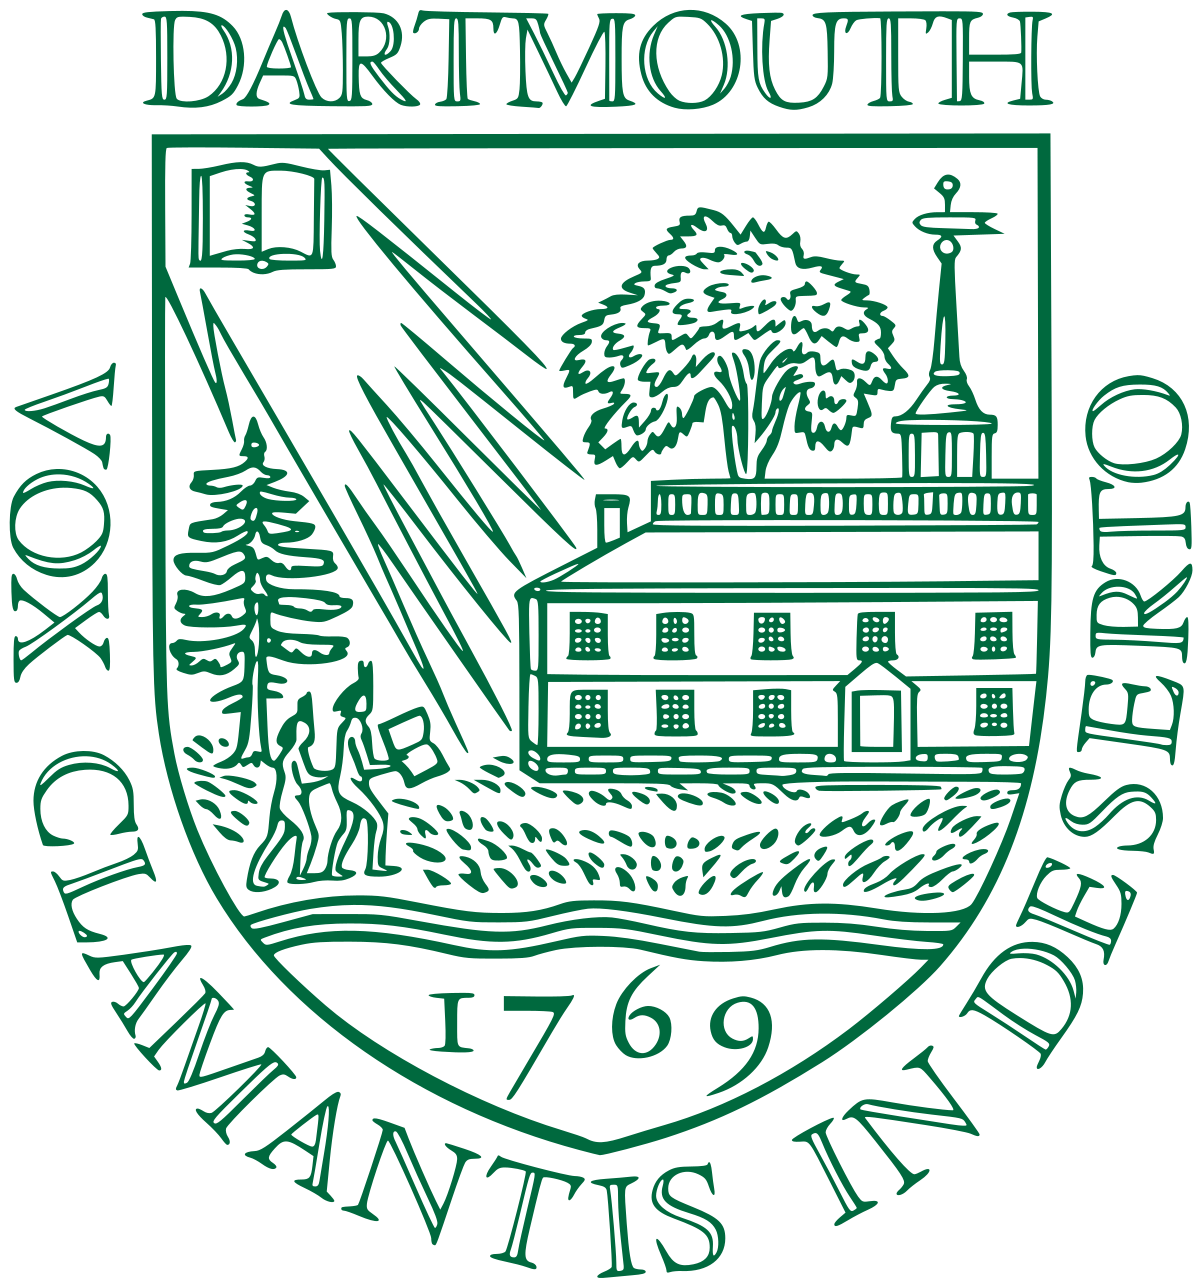 is dartmouth a research university